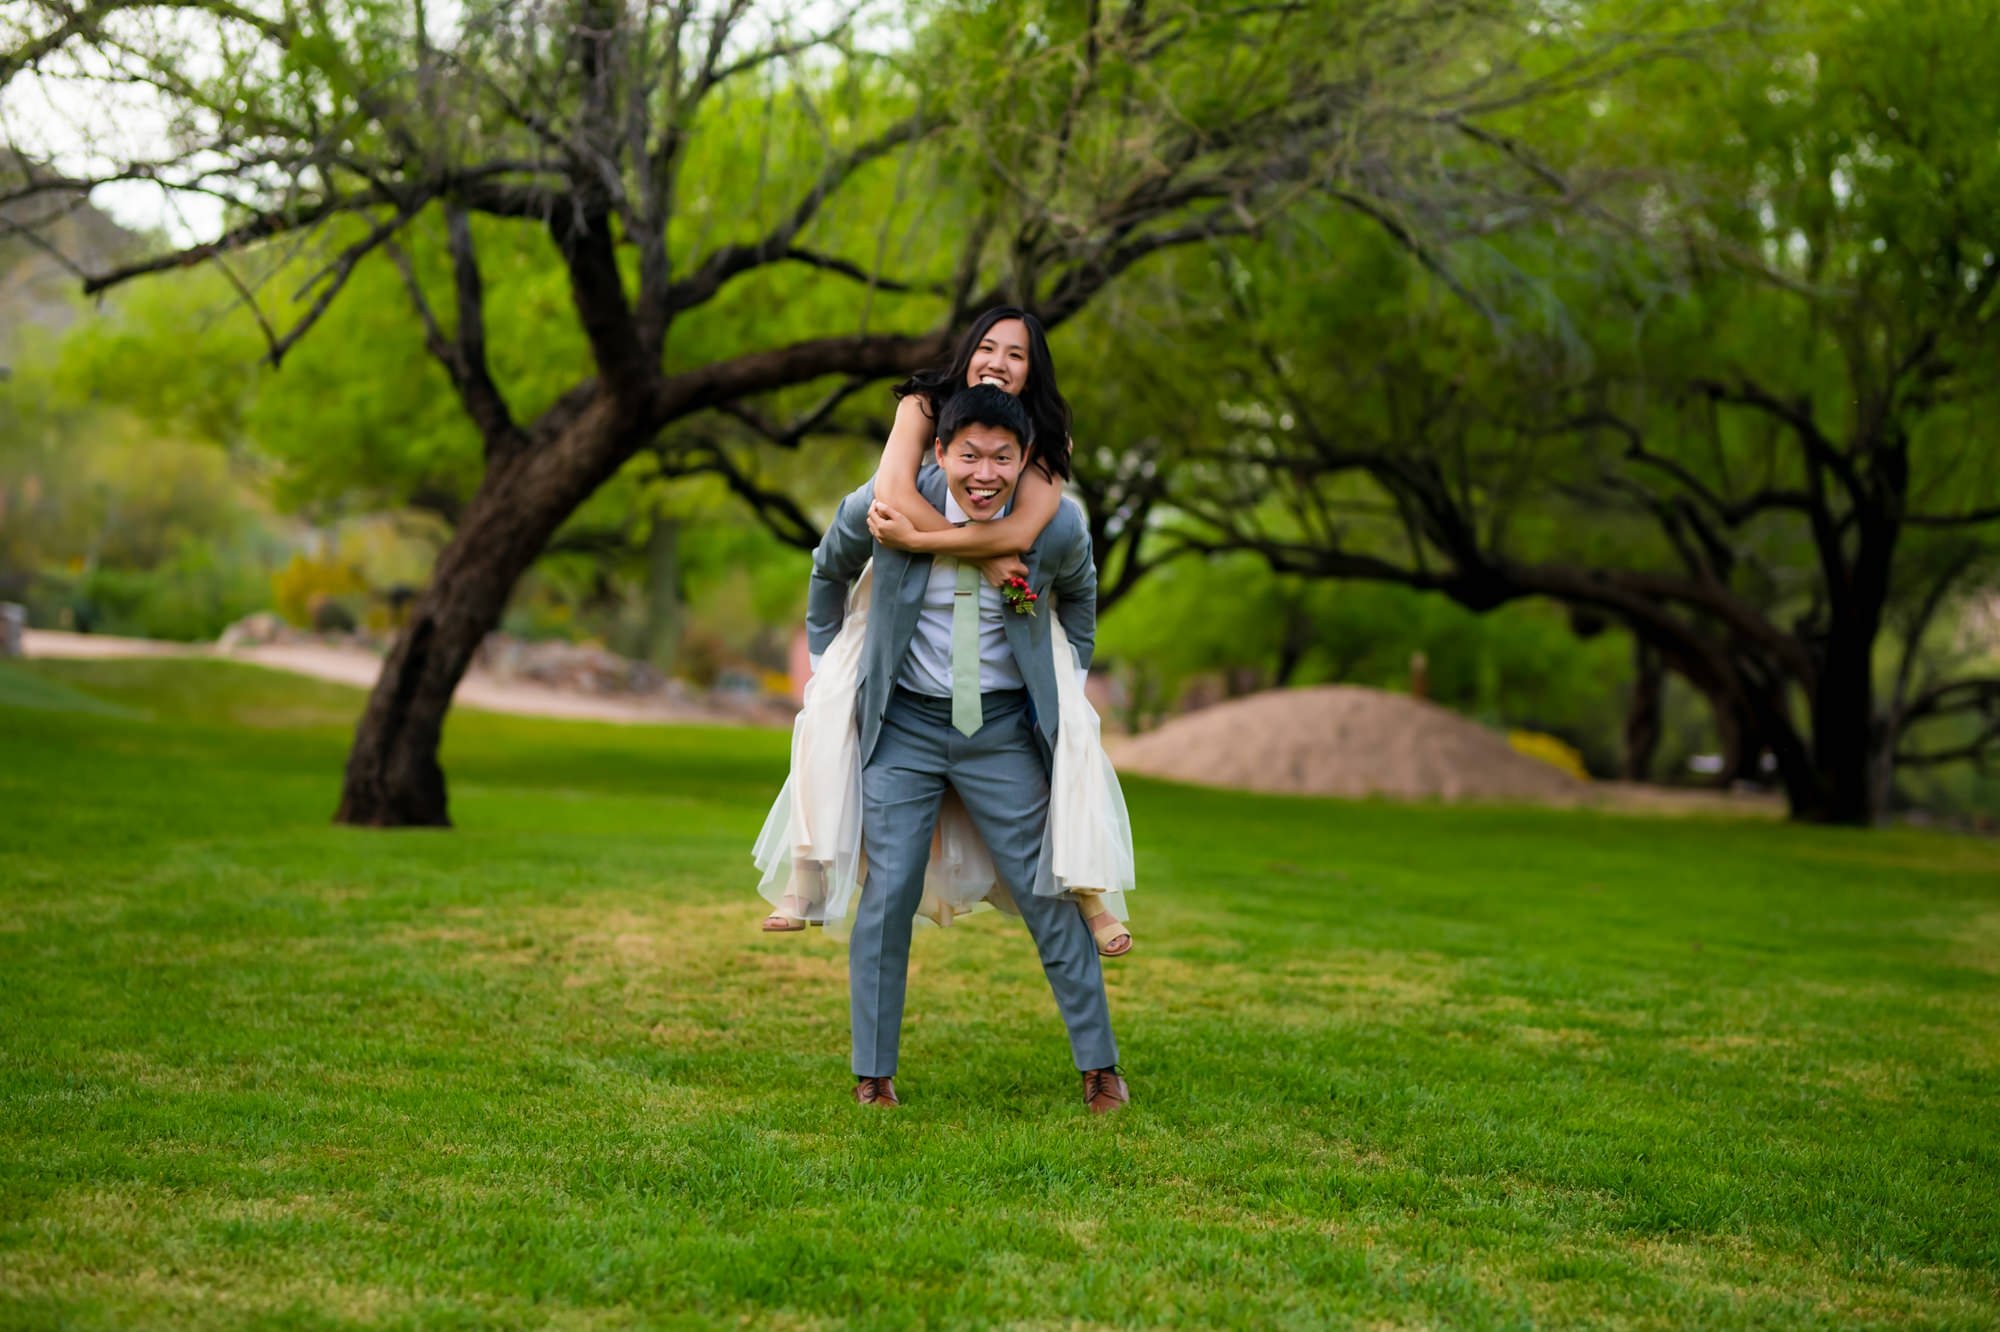 Saguaro Lake Guest Ranch The Perfect Location for a Laid-Back Fun-Filled Wedding. The best documentary wedding photographer Mantas Kubilinskas-43.jpg